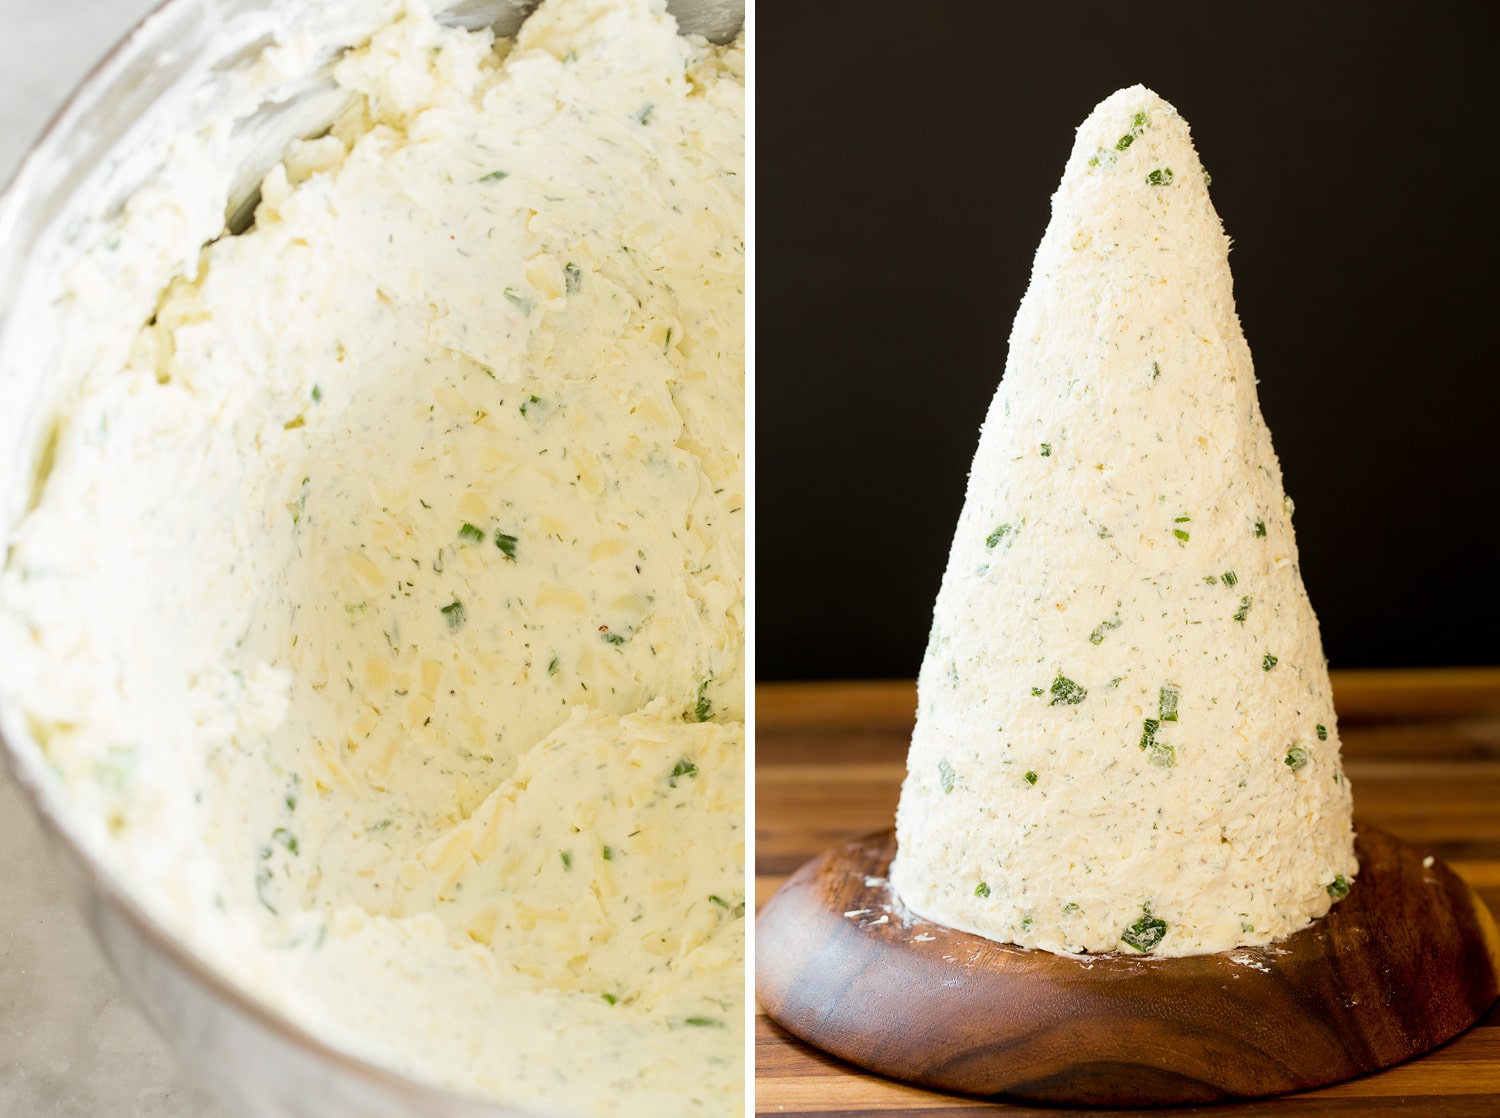 Shaping a cheese ball mixture into a cone or tree shape.